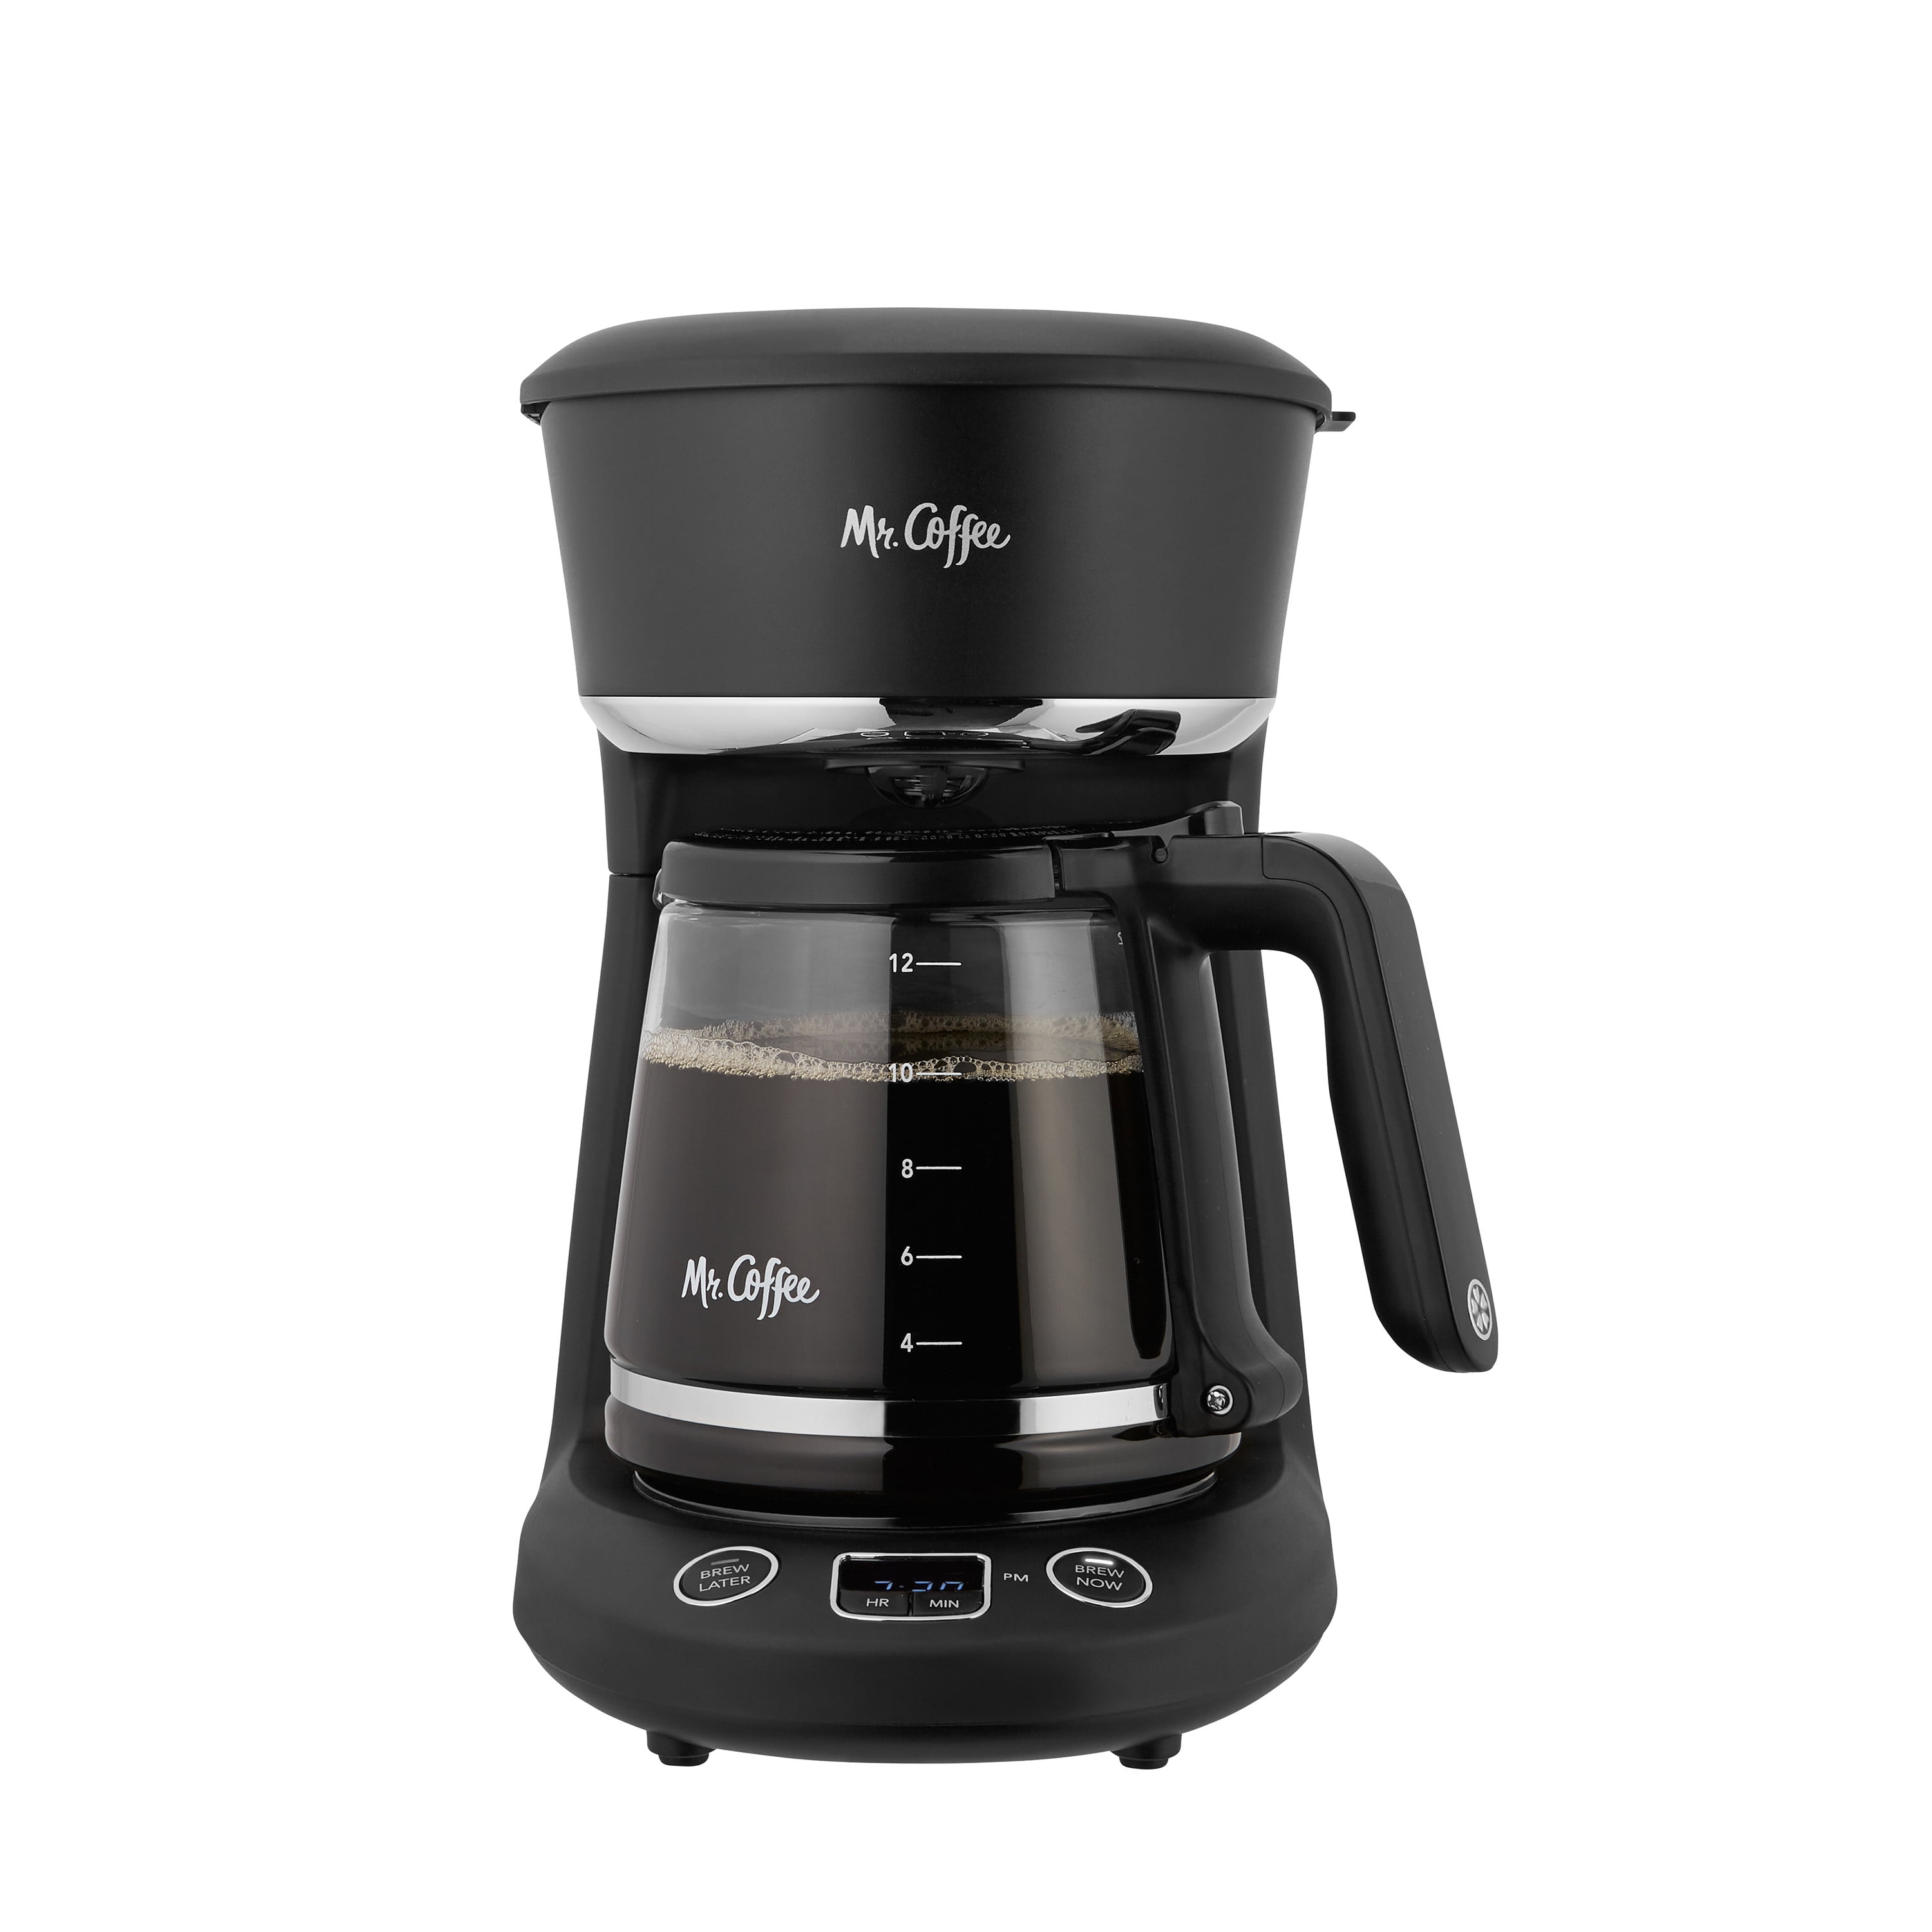 Mr. Coffee® 12 Cup Programmable Coffeemaker, 1 ct - Pay Less Super Markets